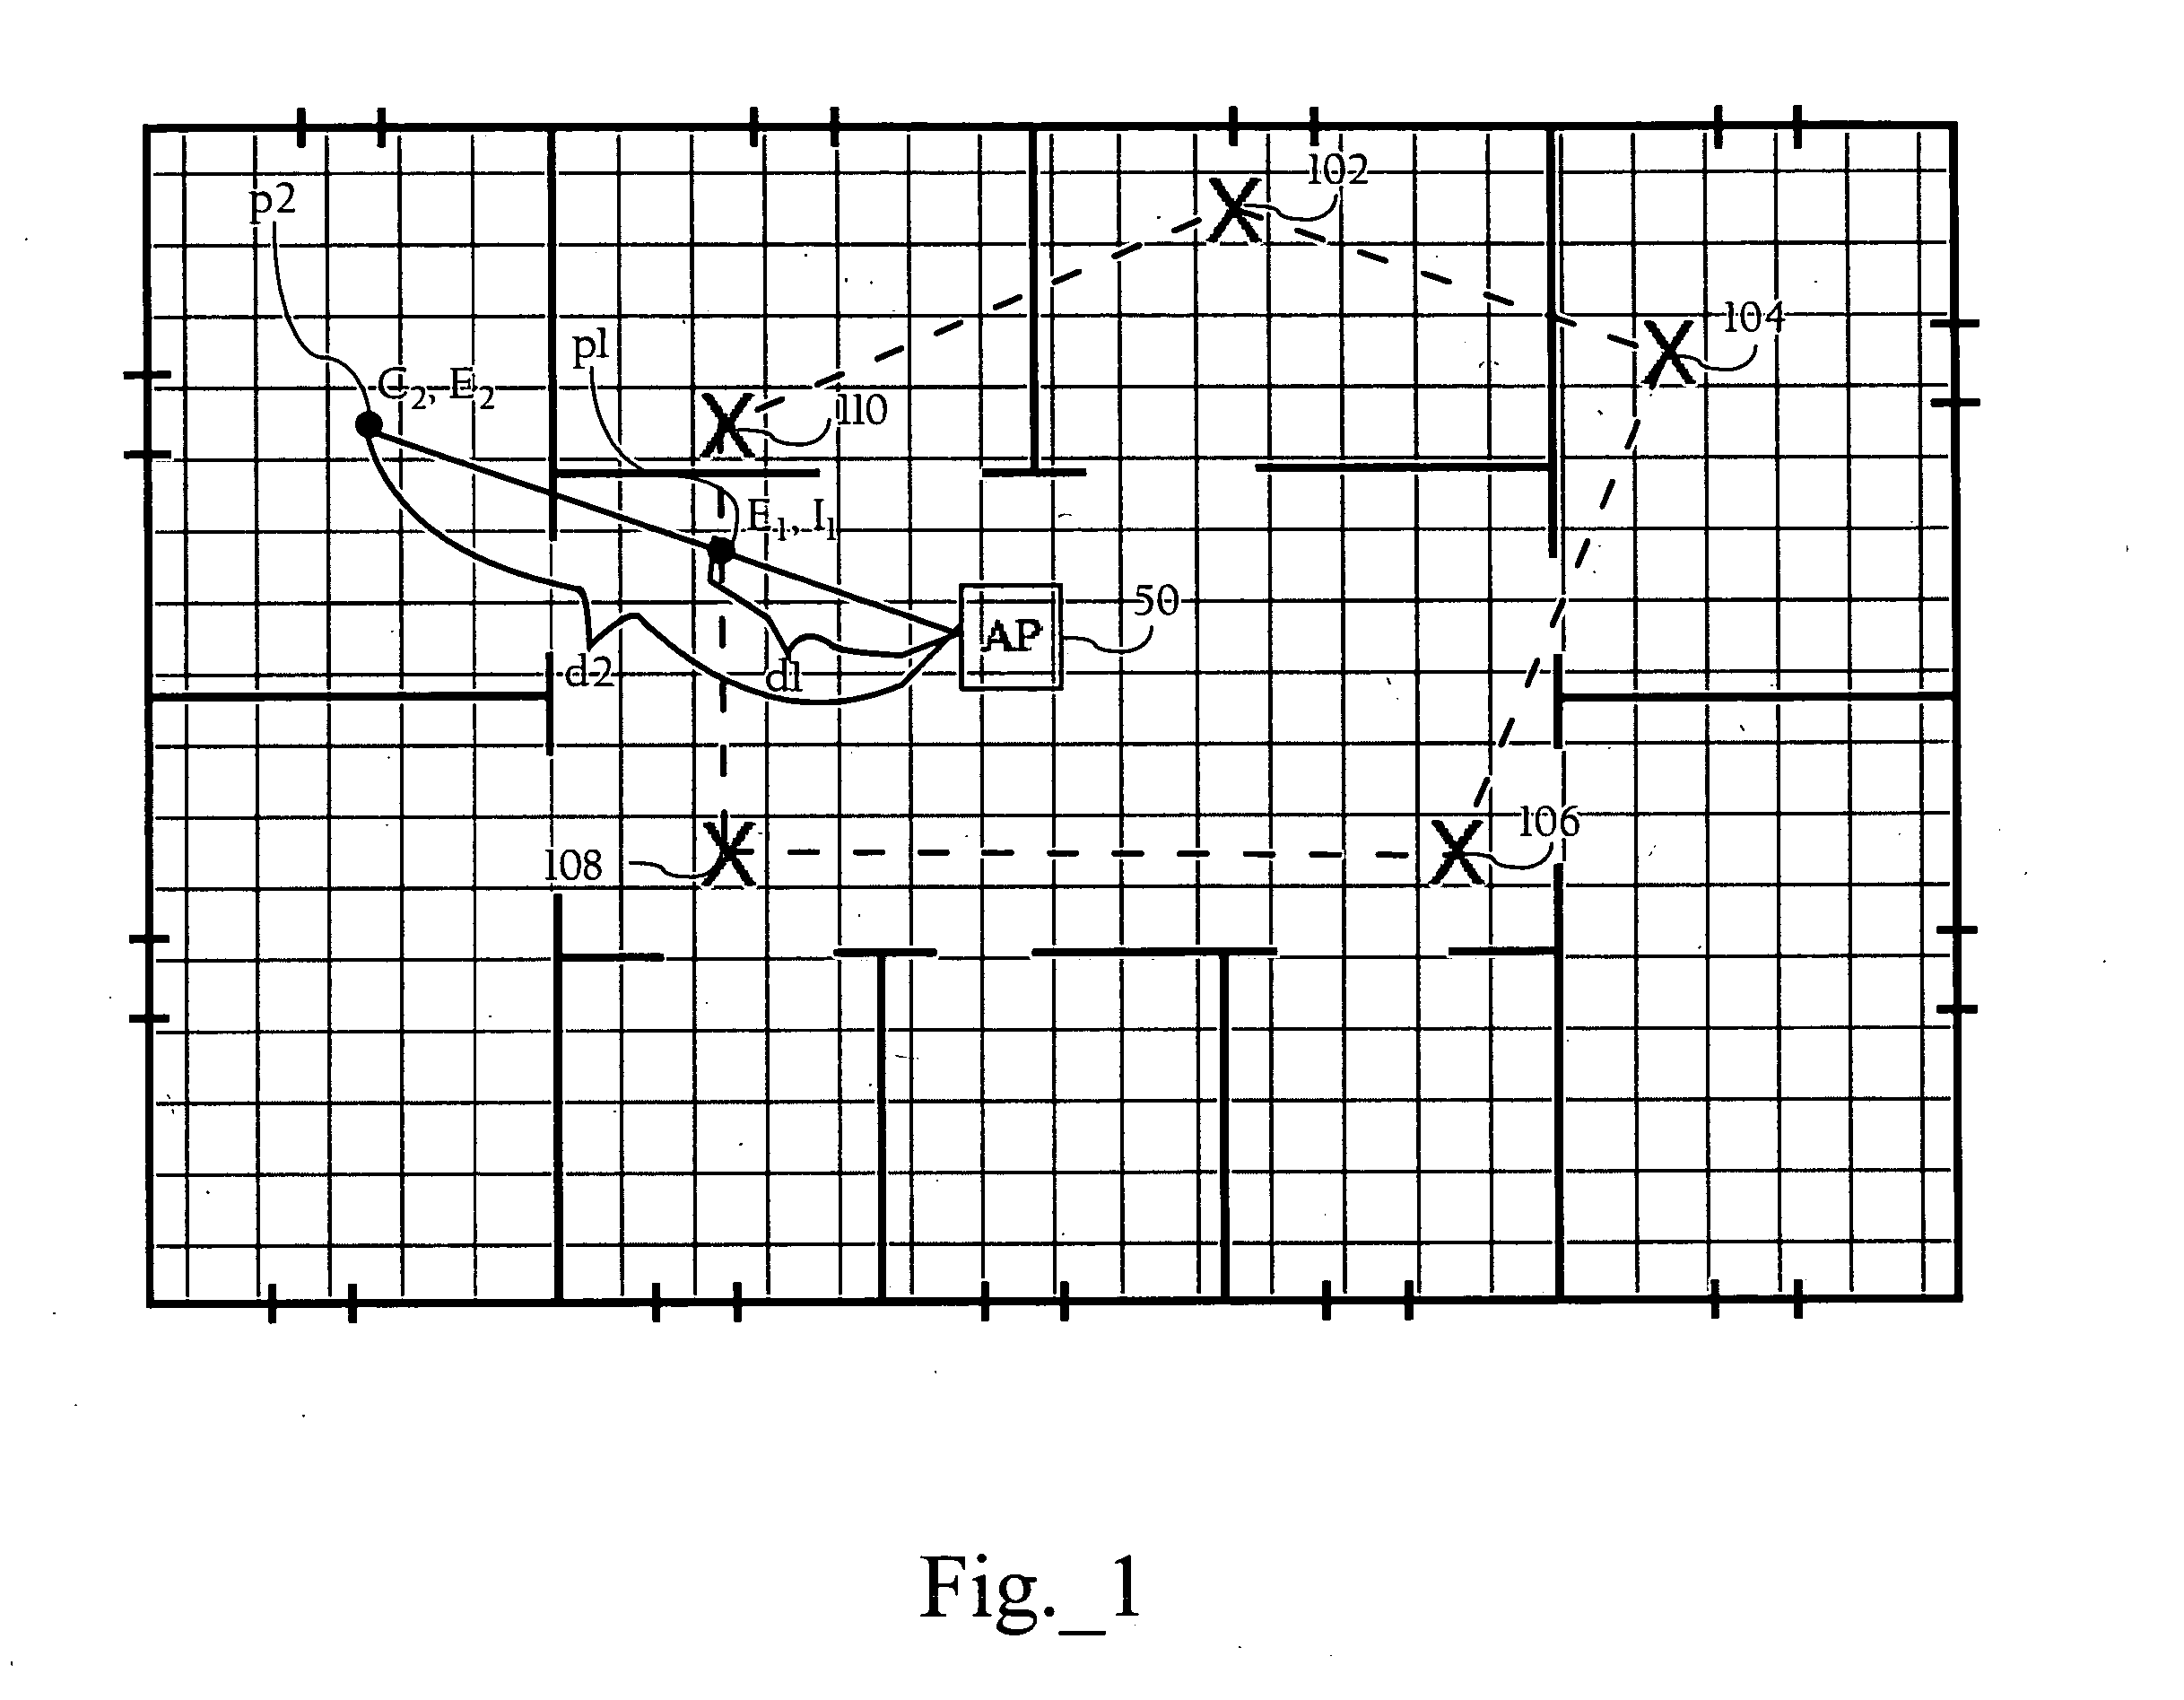 Radio frequency coverage map generation in wireless networks